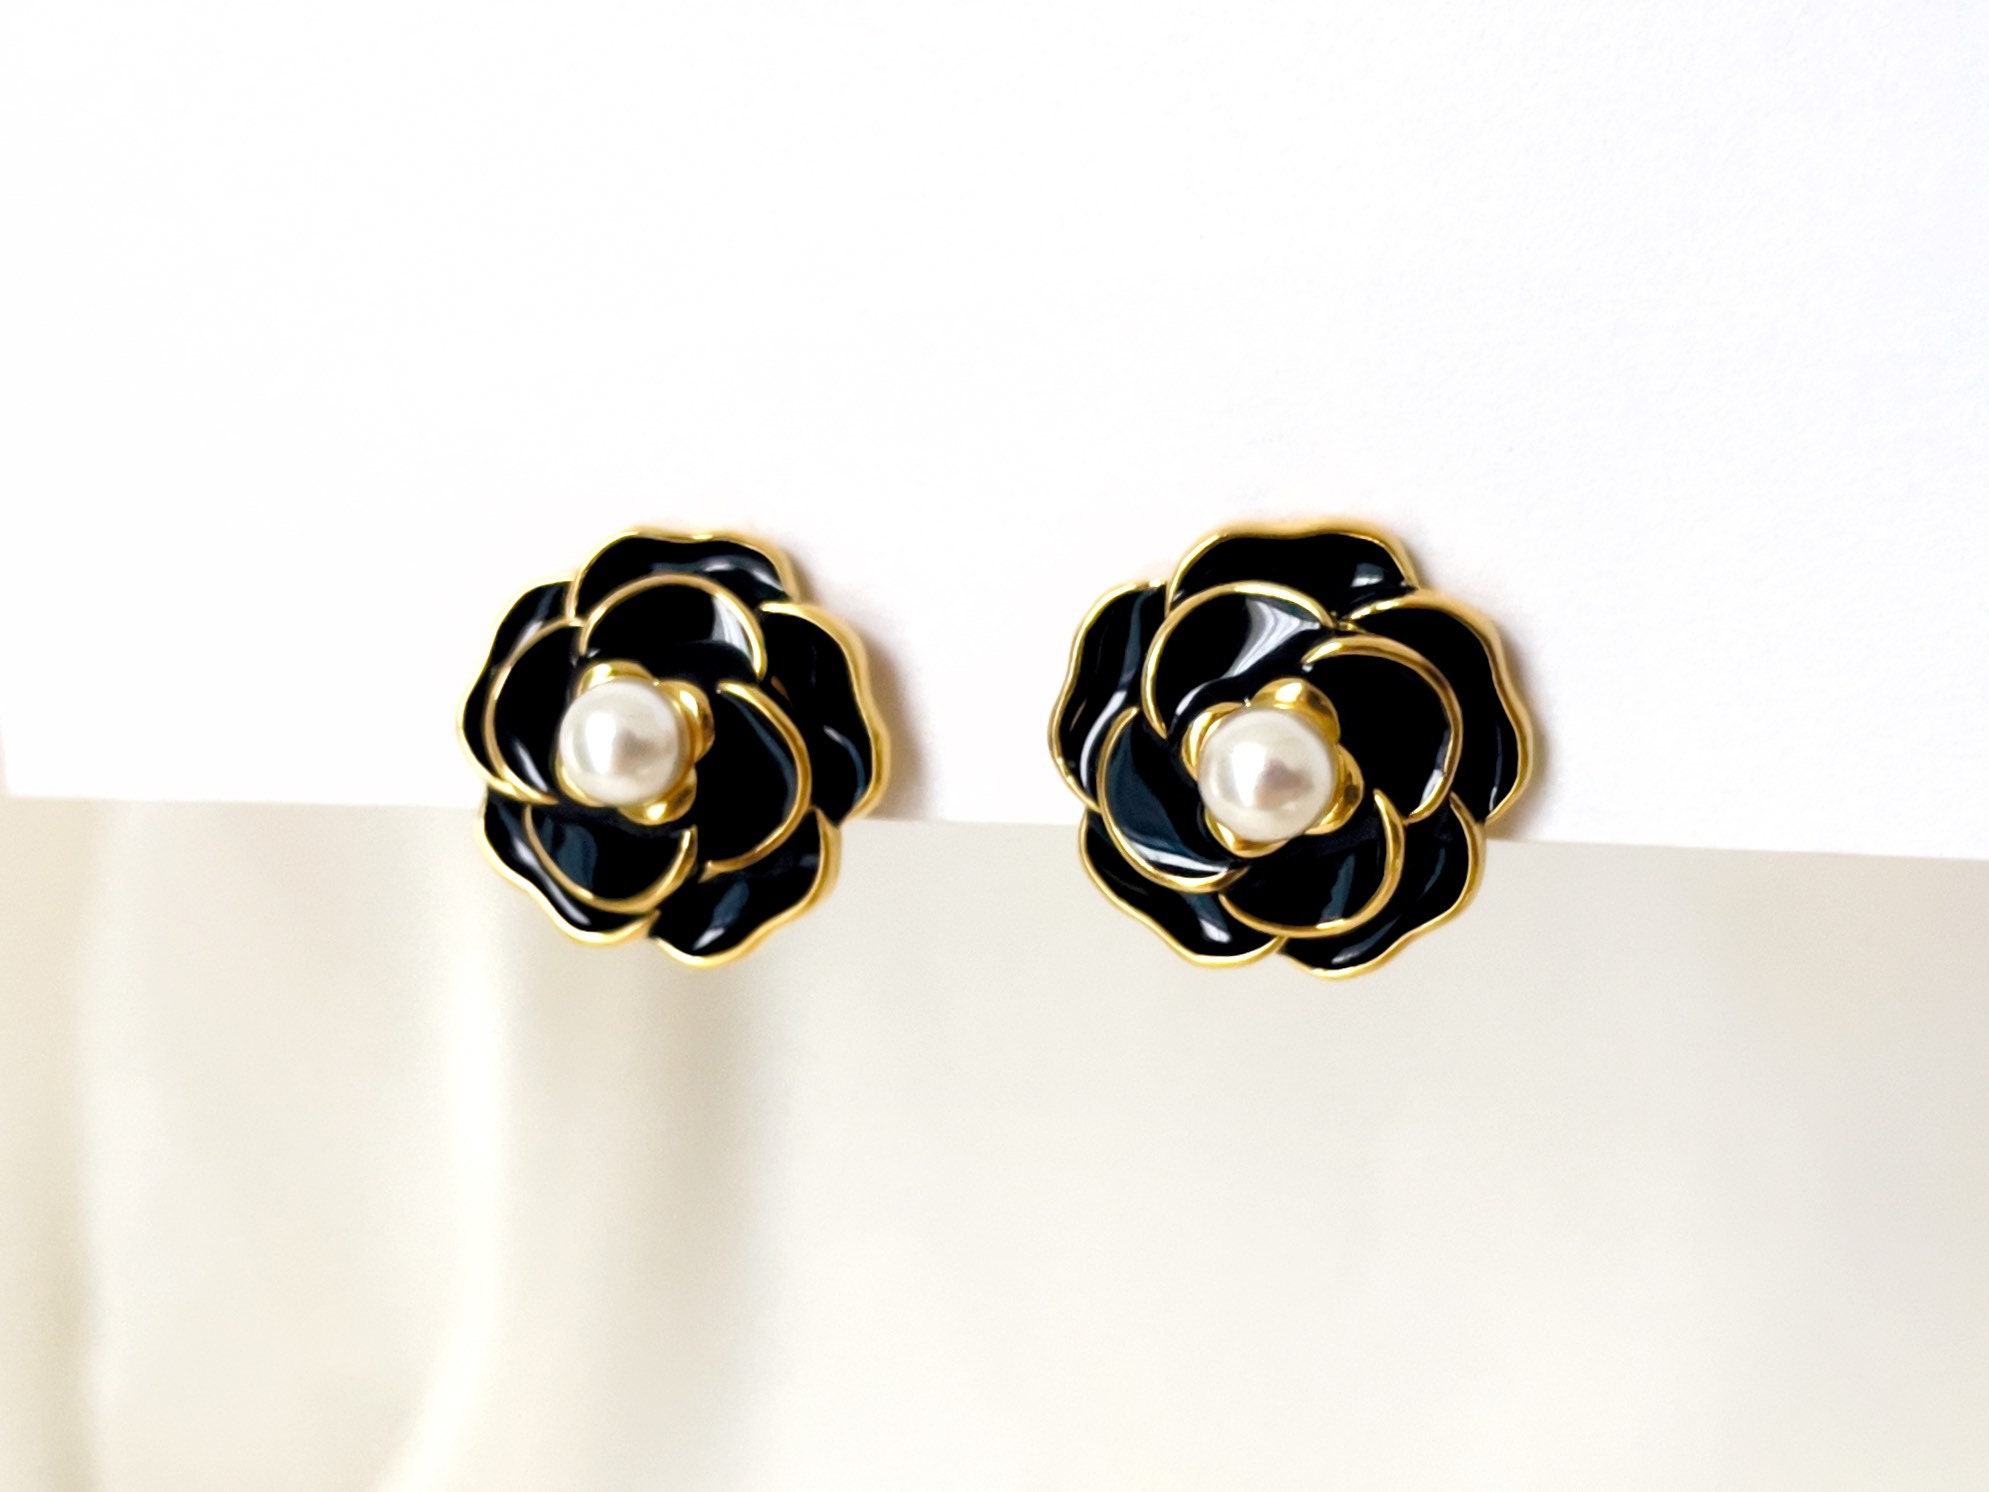 CHANEL Buttons Authentic Chanel Camellia Buttons Vintage